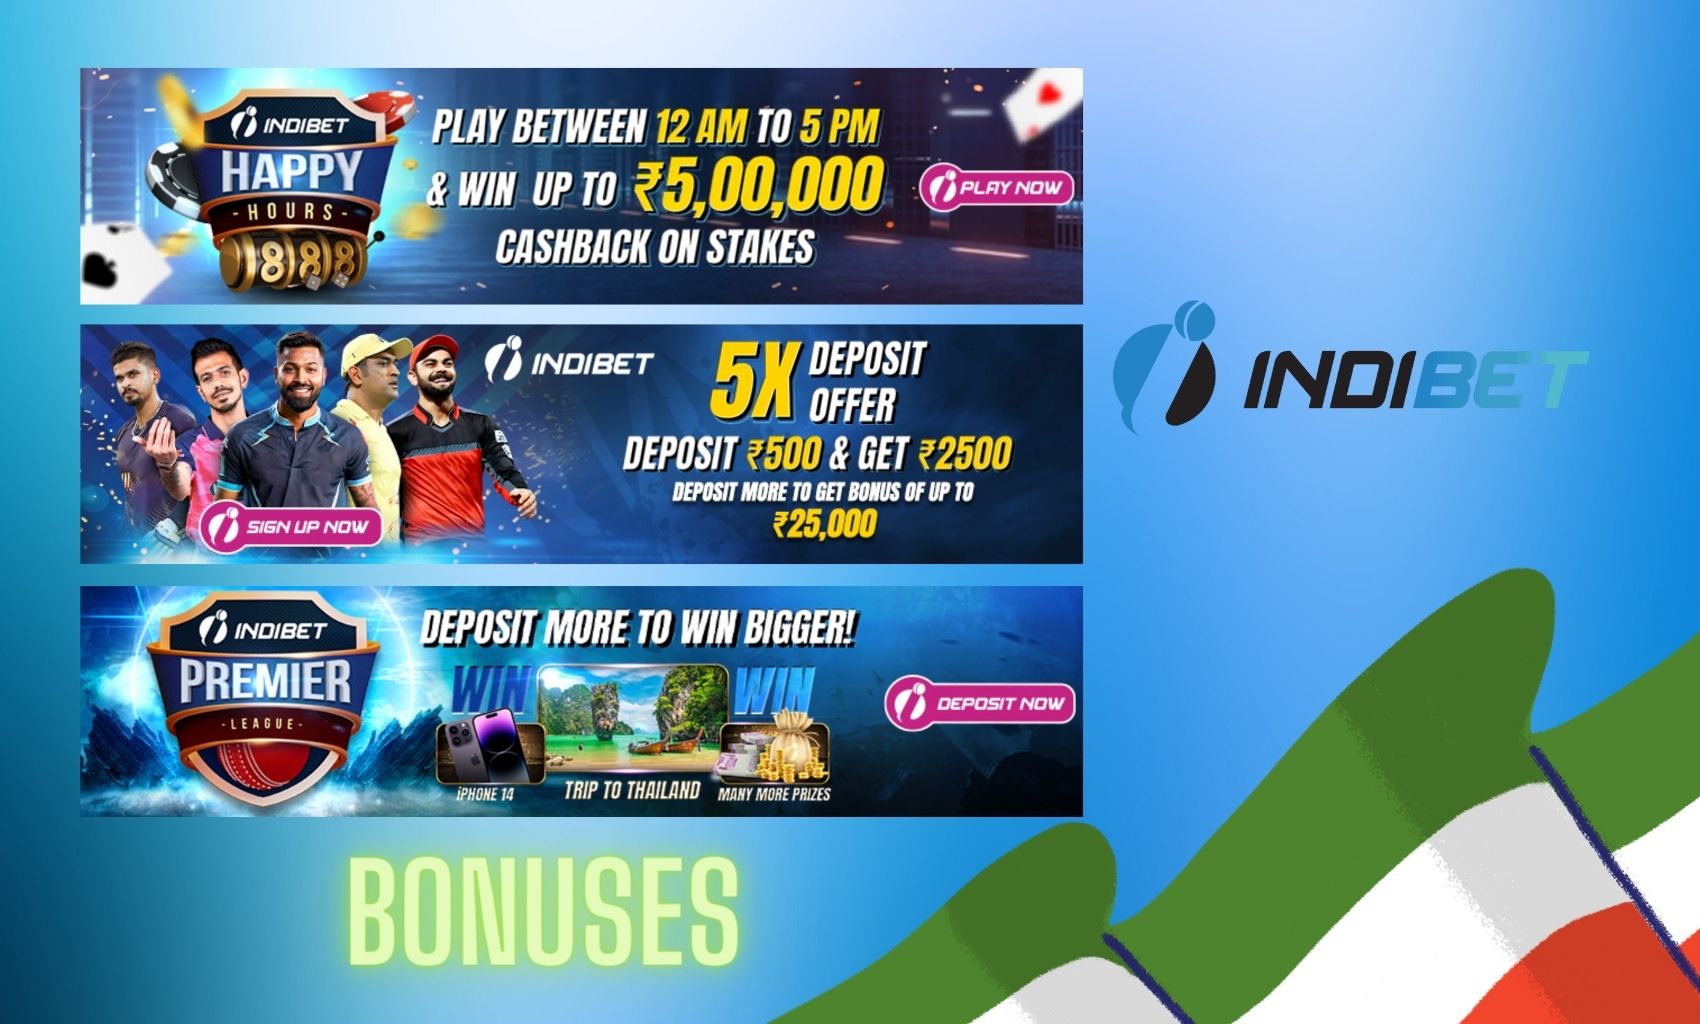 Understanding the Bonuses and Promotions Offered by the INDIBET